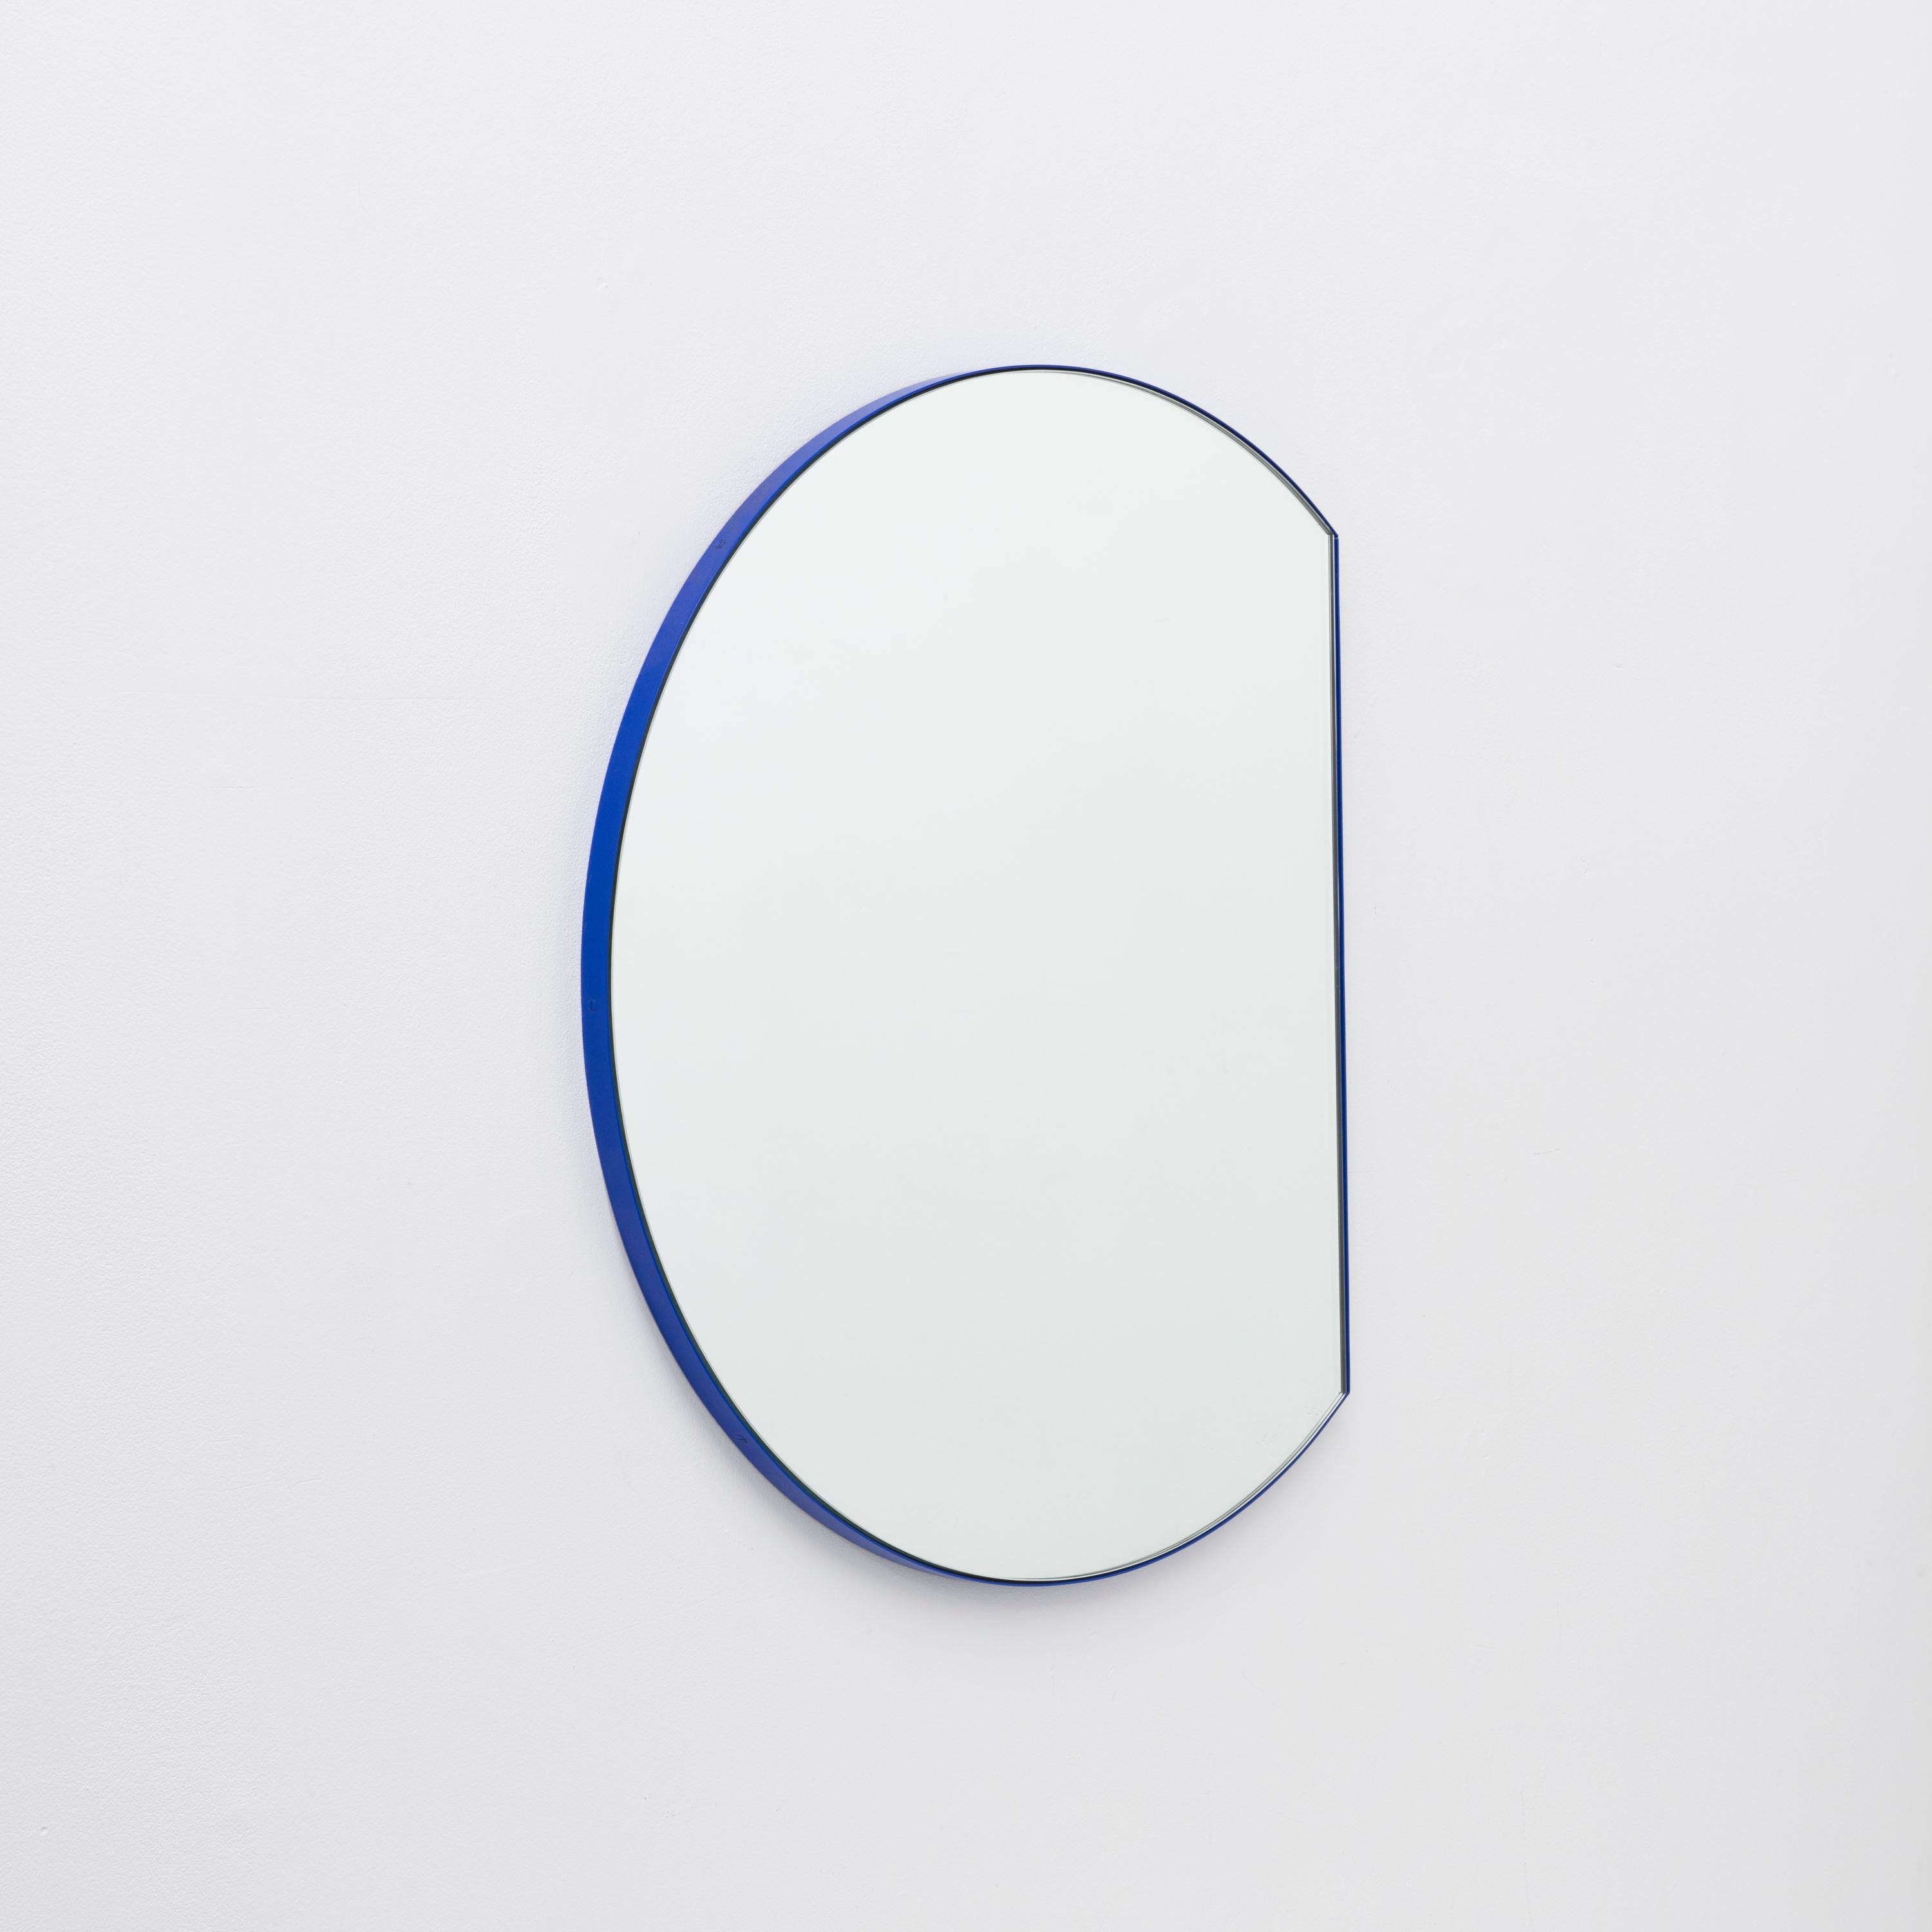 In Stock Orbis Trecus Cropped Round Modern Mirror, Blue Frame, Medium In New Condition For Sale In London, GB